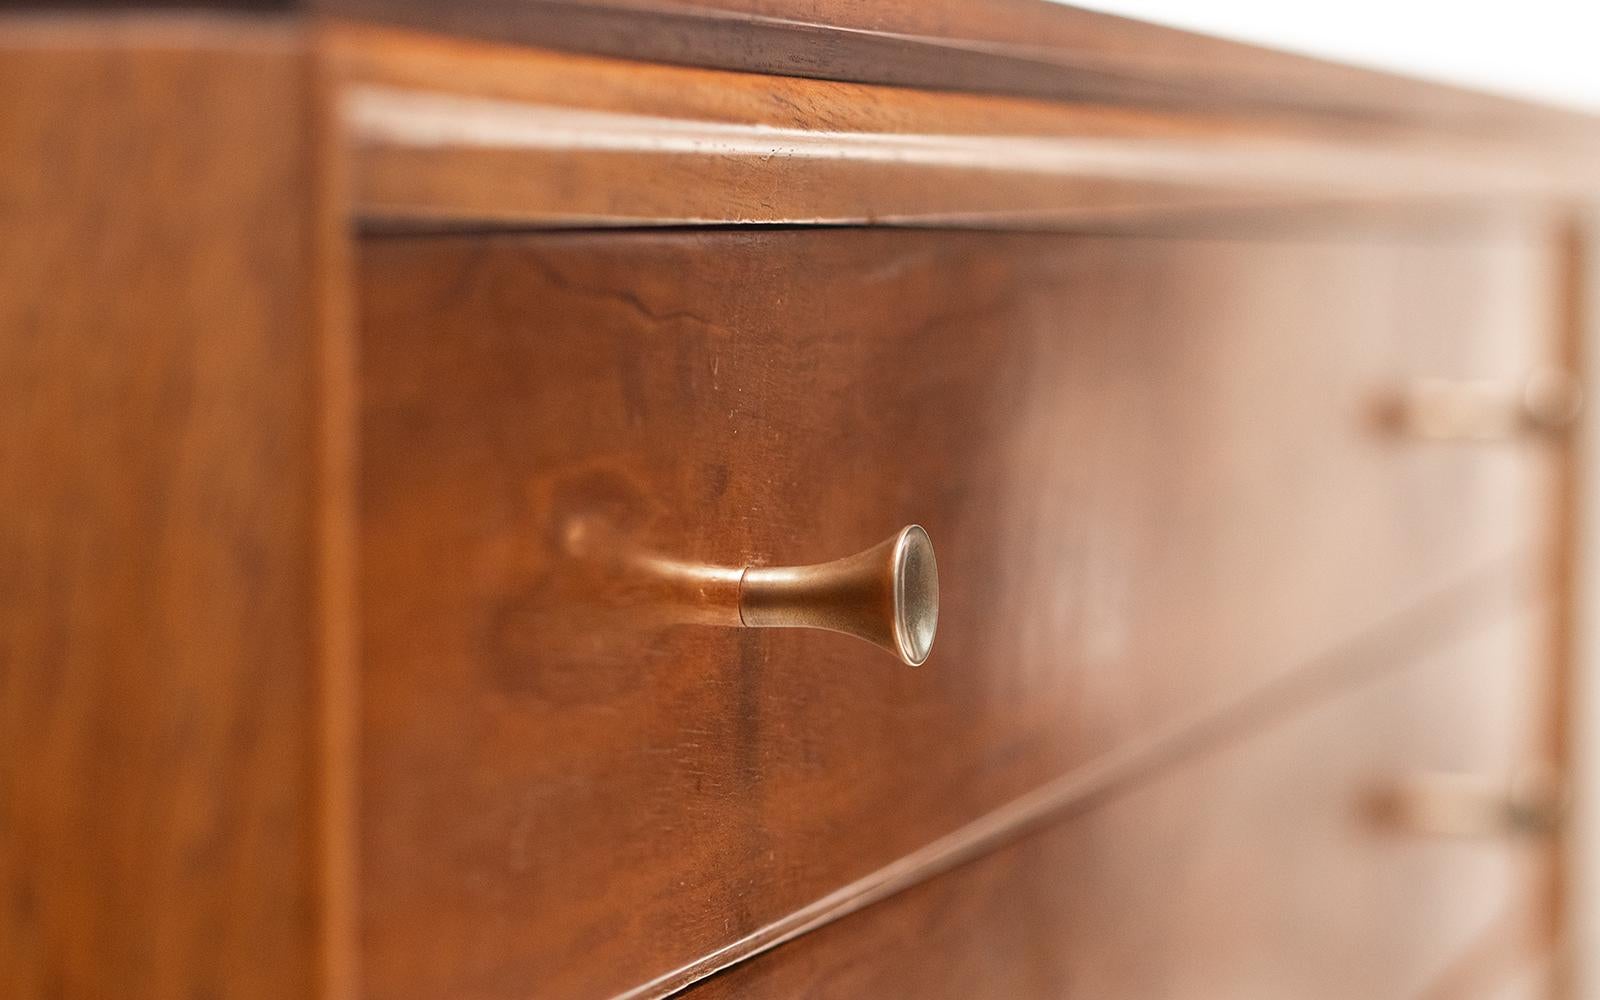 Archie Shine Sideboard

Robert Heritage for Archie Shine 'Hanover' sideboard, with four drawers, recessed brass trumpet-shaped handles inset into the Rosewood. Two doors are enclosing a storage area with an internal shelf.

East London furniture